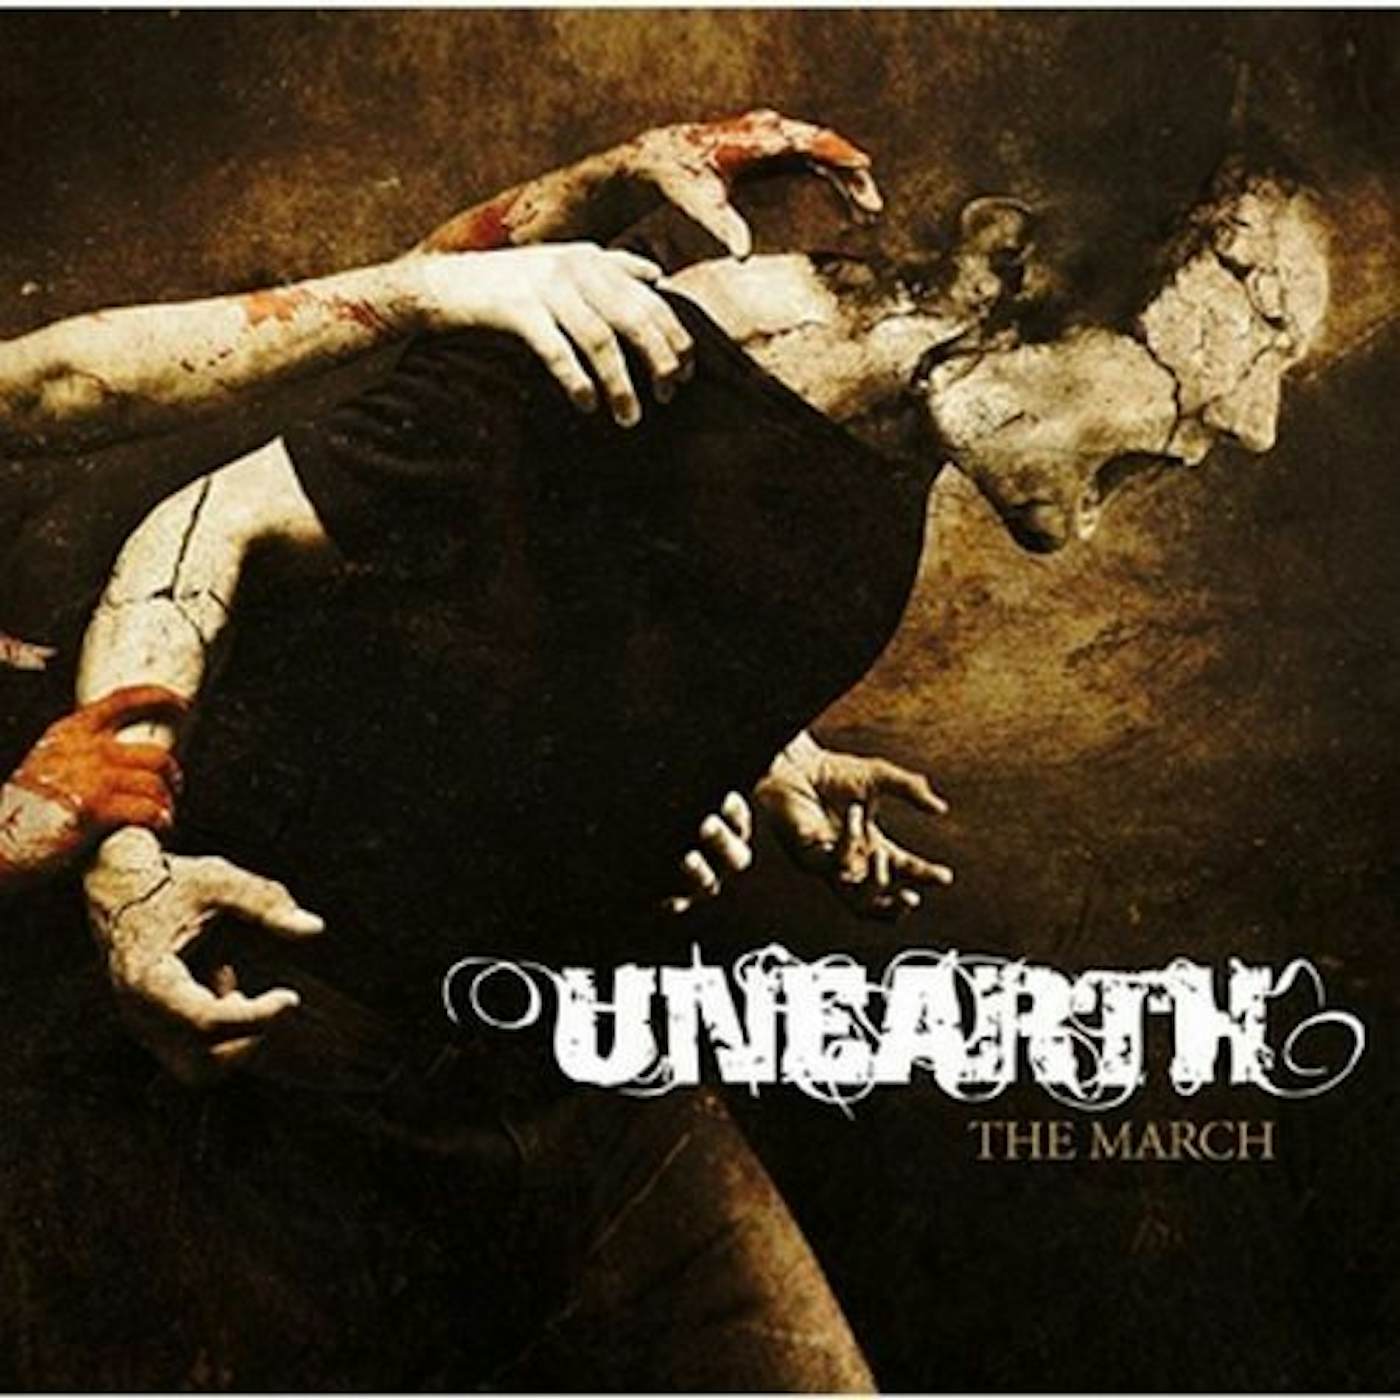 Unearth MARCH CD